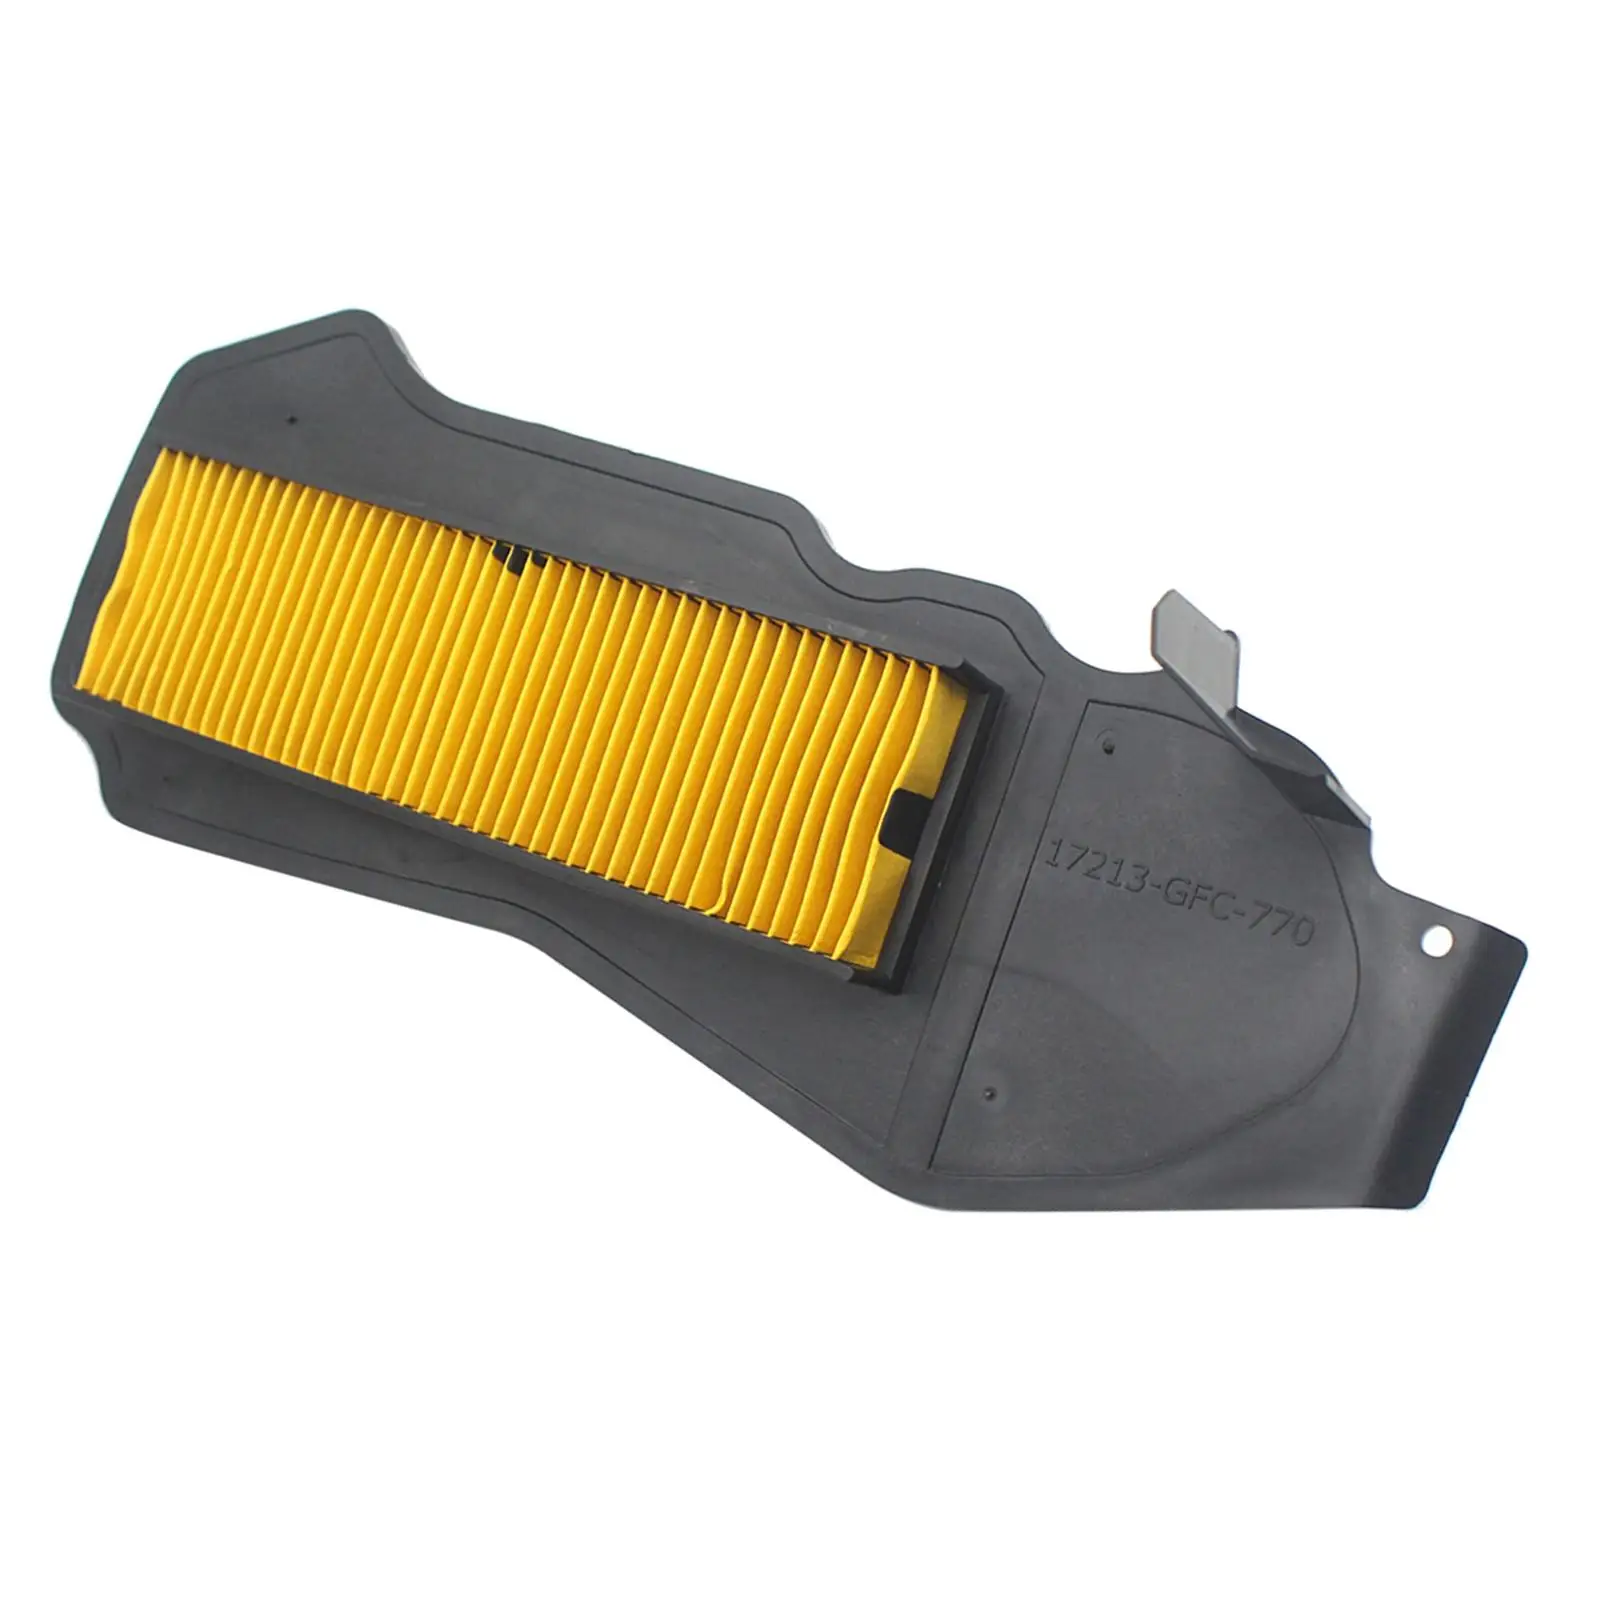 Motorcycle Air Filter Intake Cleaner for HONDA Dio AF68 Intake Air Filter, developed for modern high performance engines